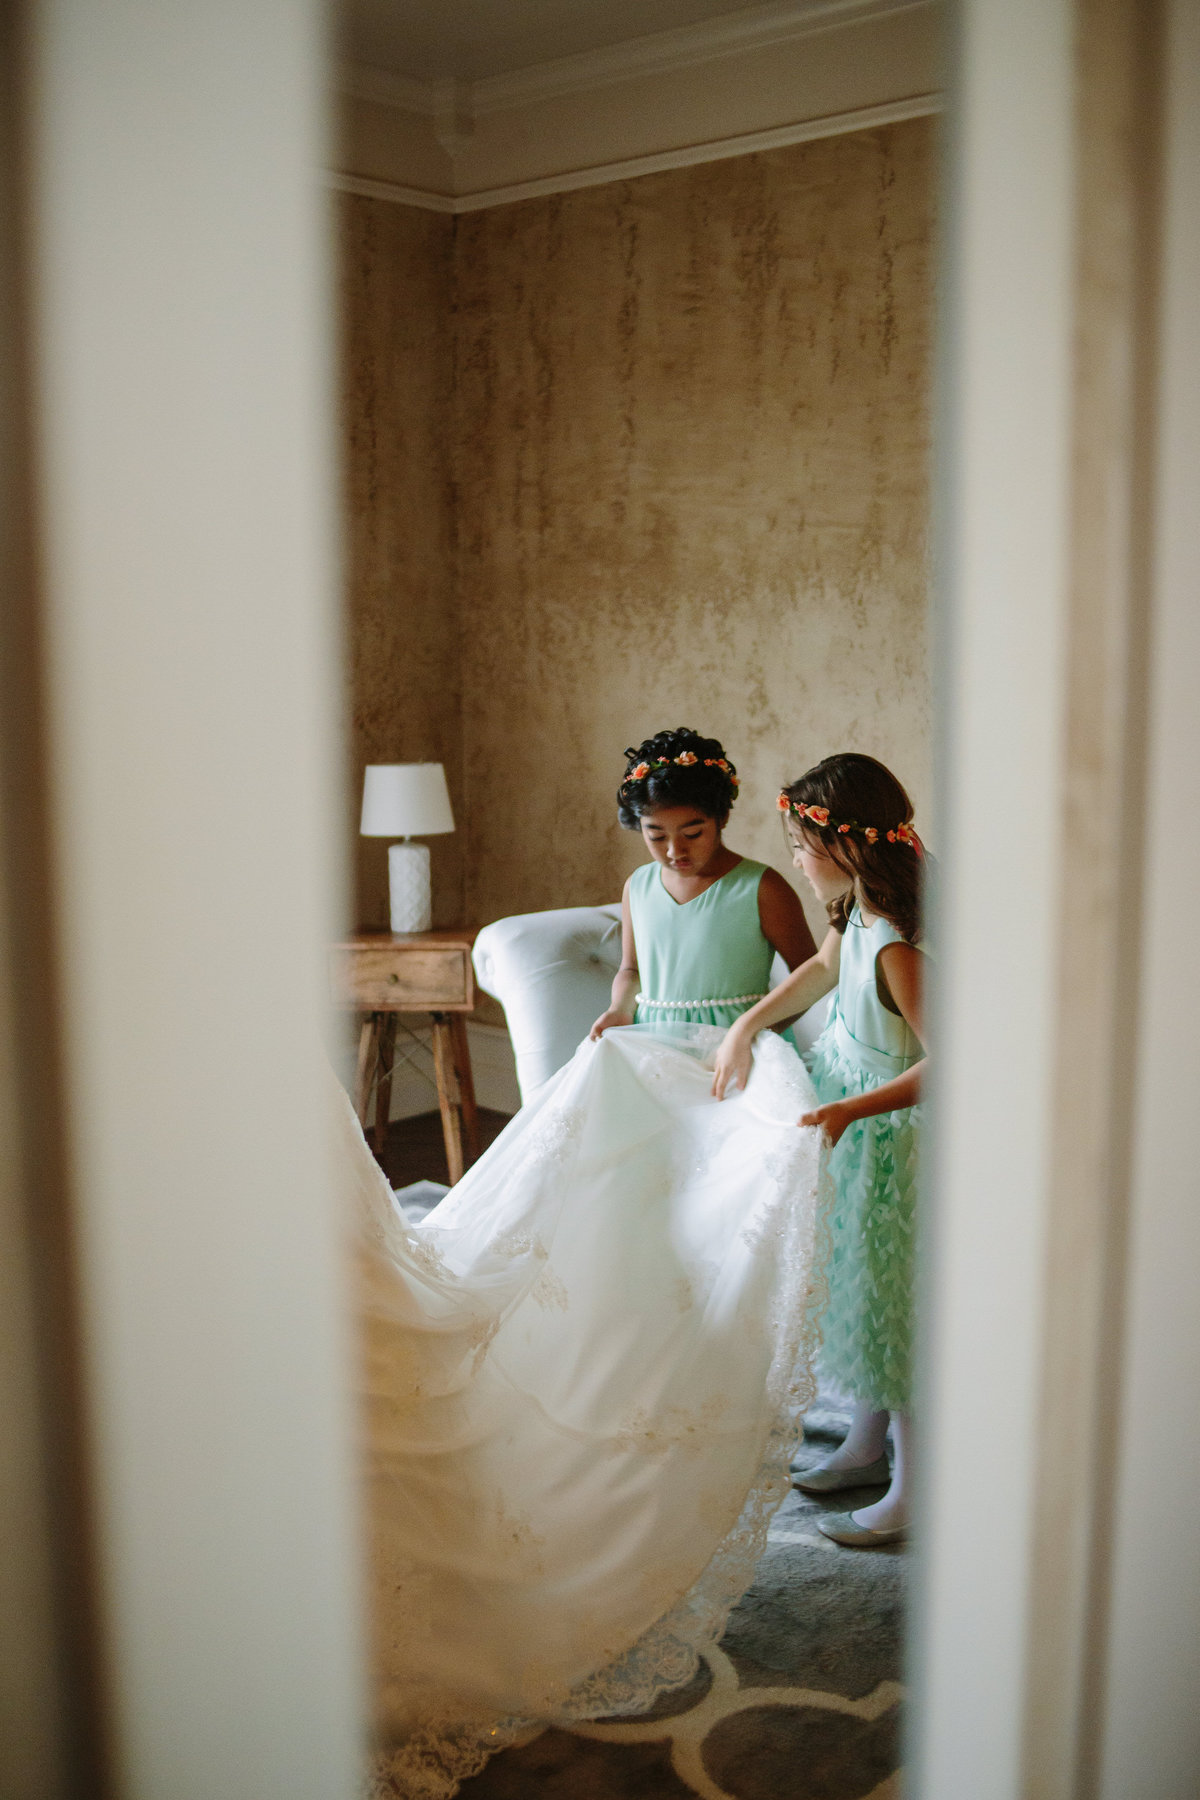 Flower girls checking out bridal gown before wedding while getting ready